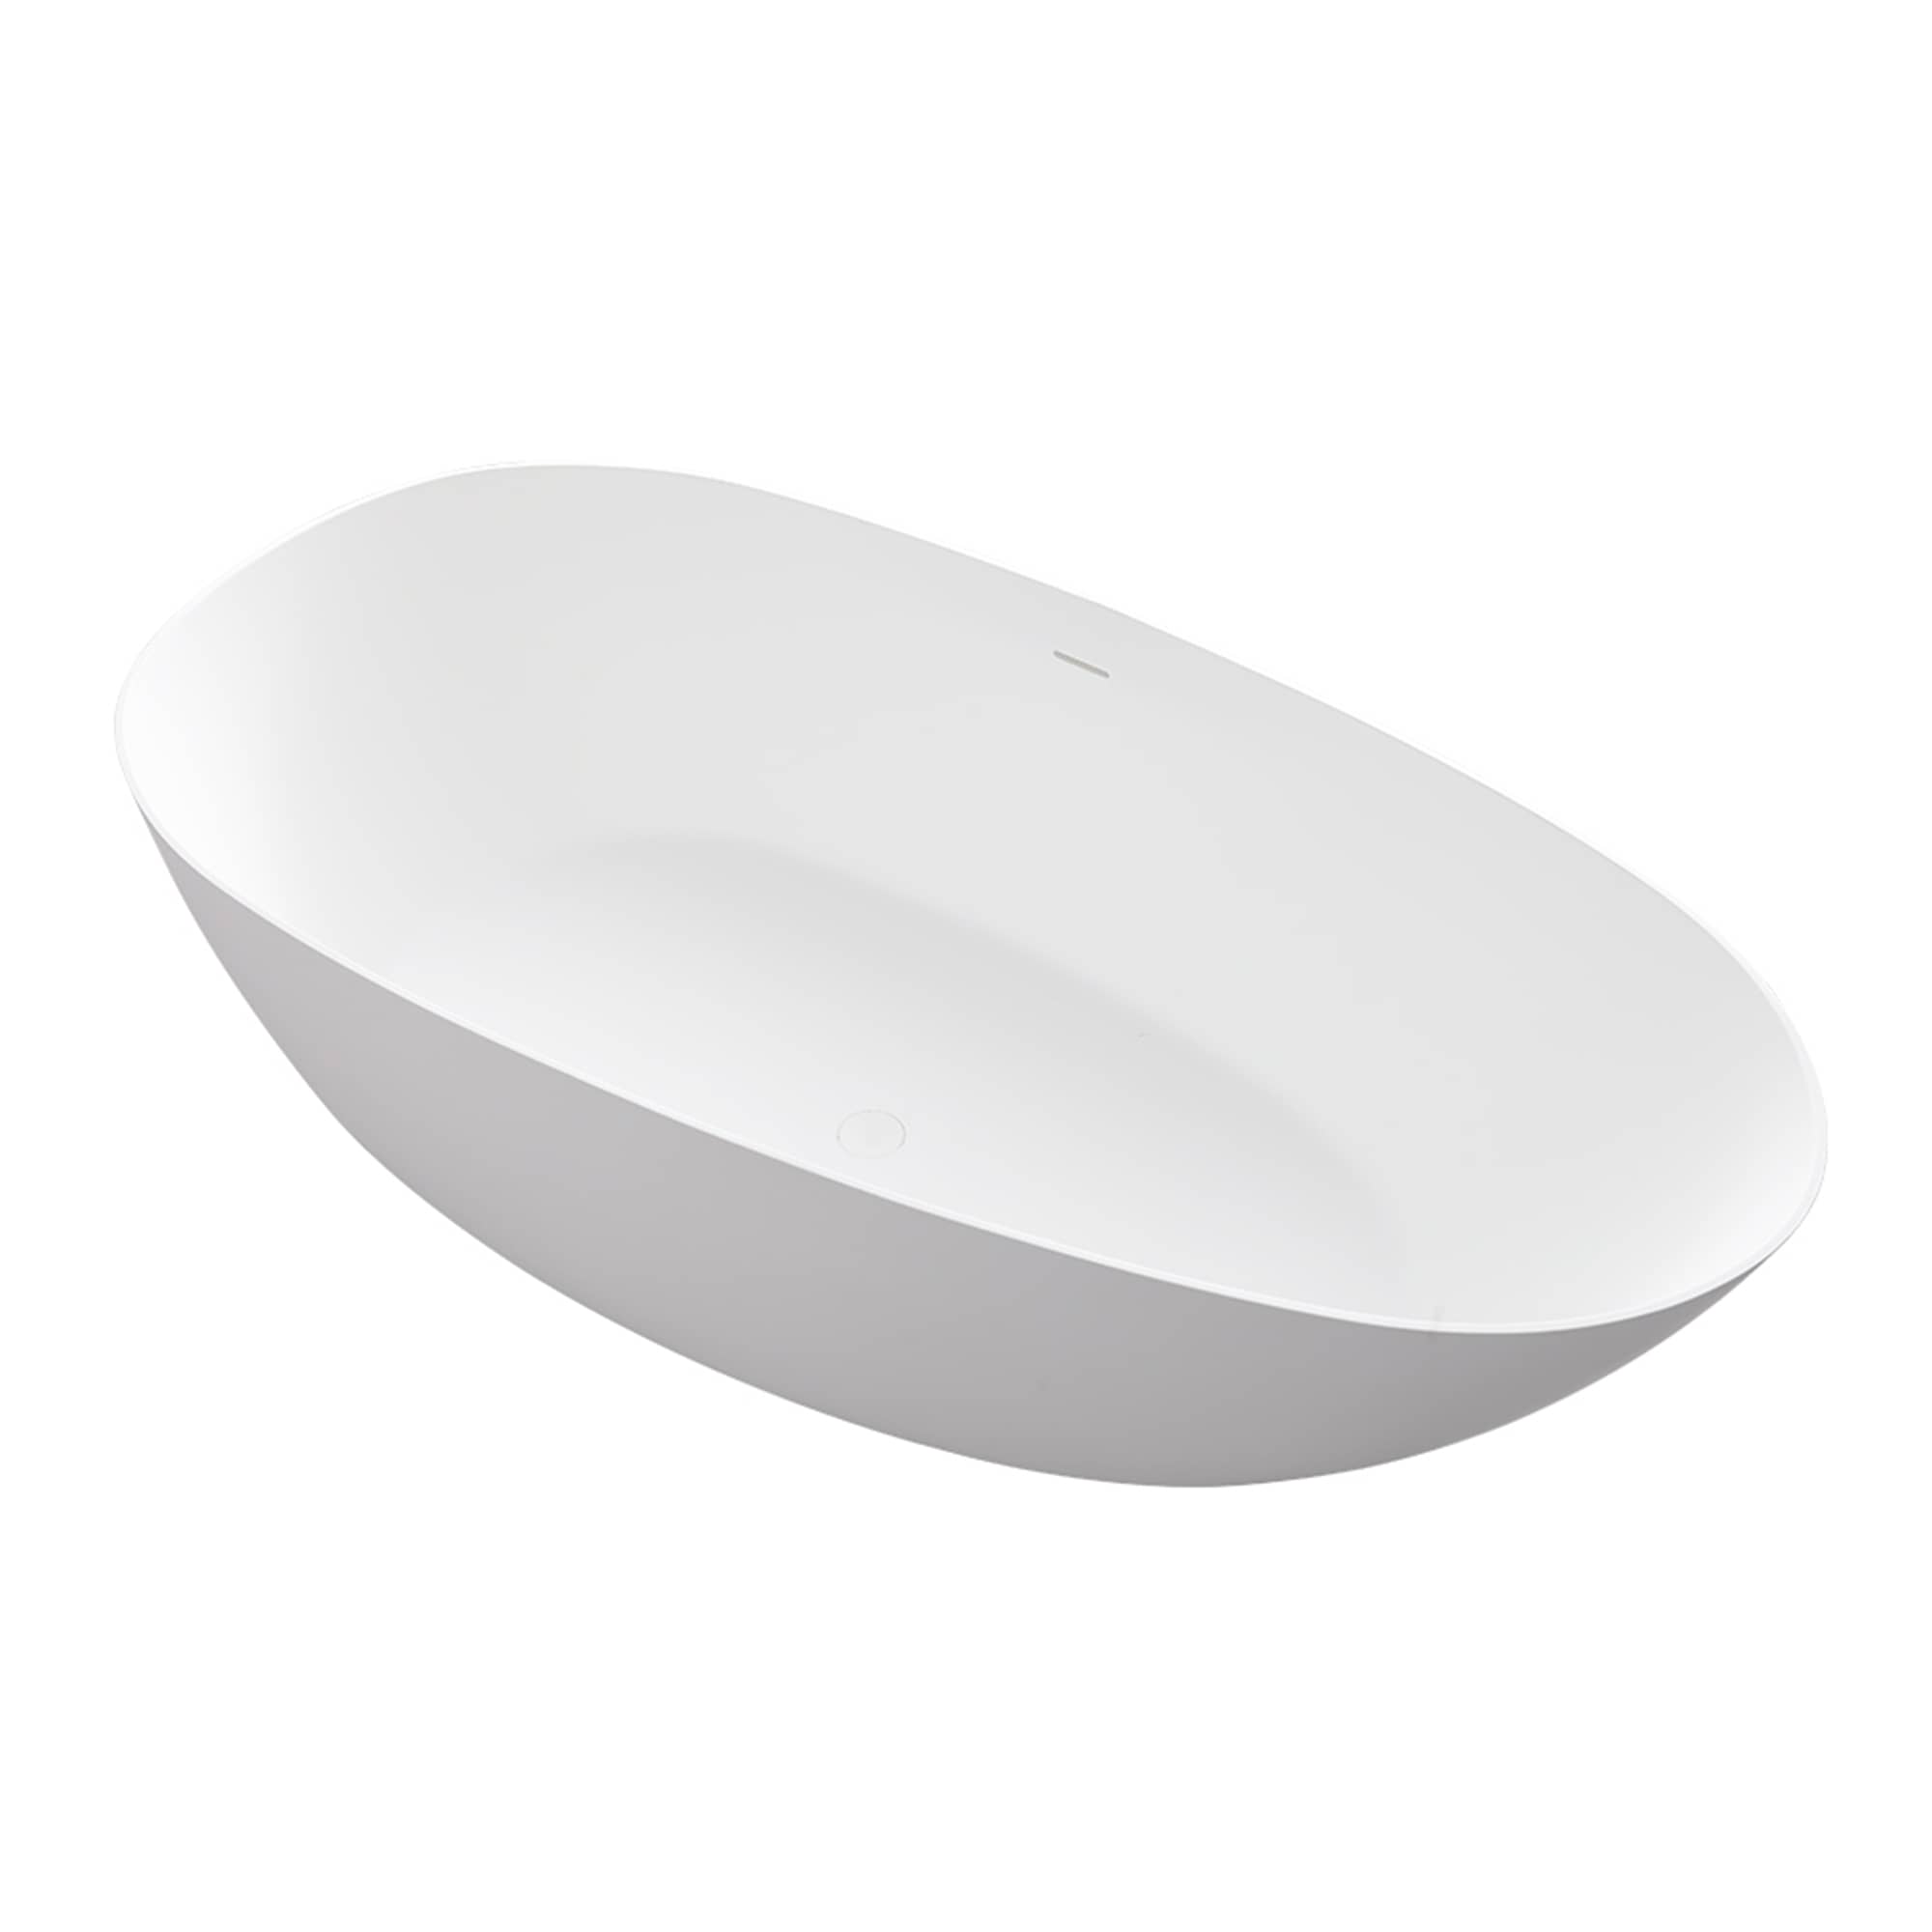  59/63/67/71“ Stone Resin Bathtubs, Contemporary Designs for Oval Shaped Composite Flatbottom Tubs in White, Ultimate Tubs Collection with Free-Standing Design and Durable Material Base